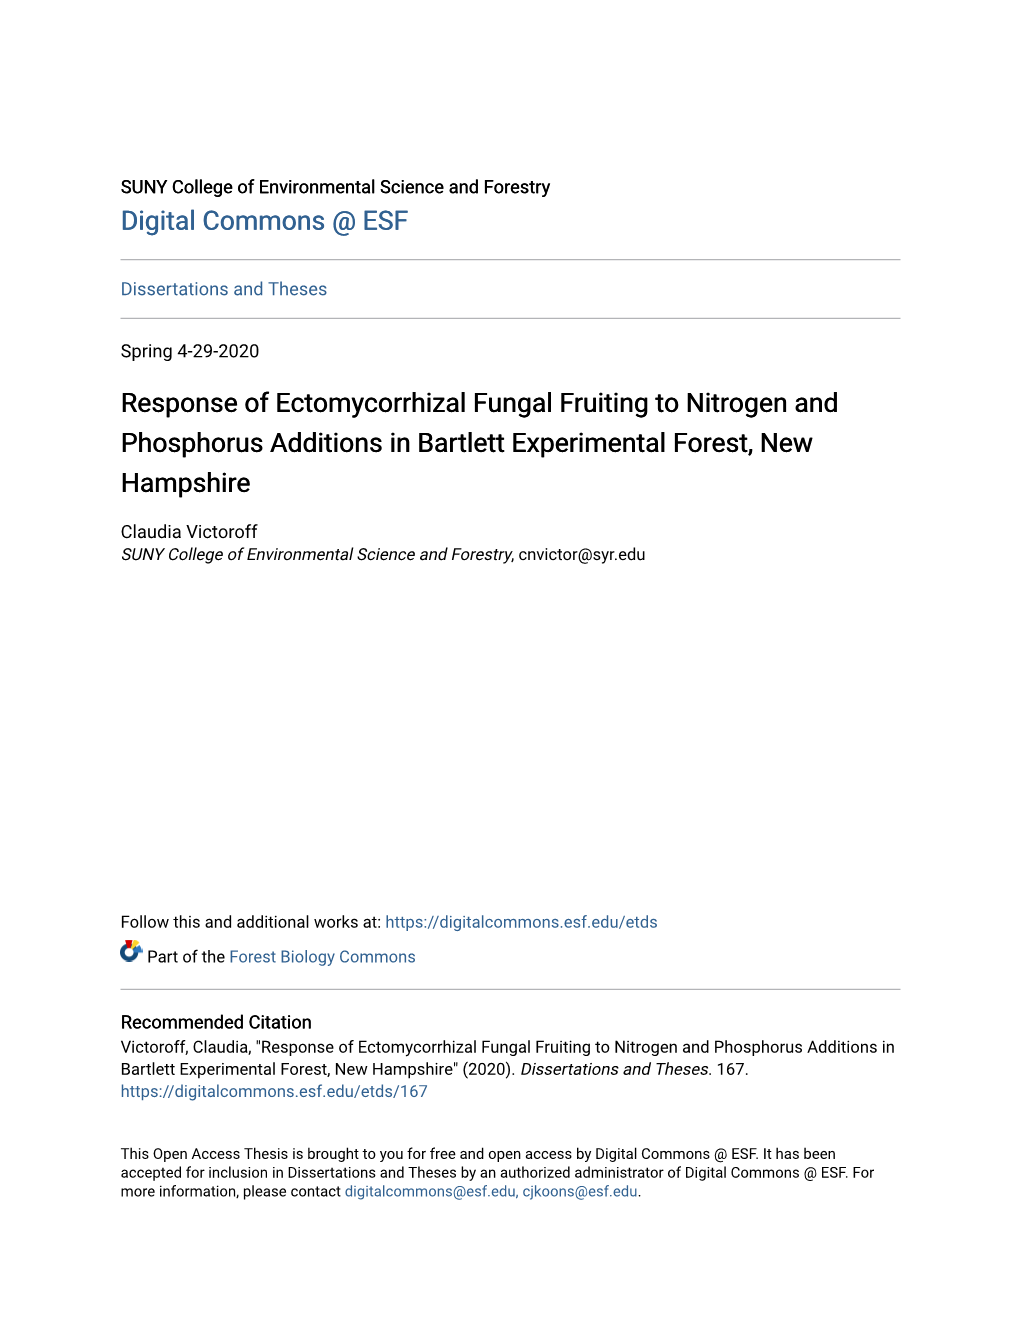 Response of Ectomycorrhizal Fungal Fruiting to Nitrogen and Phosphorus Additions in Bartlett Experimental Forest, New Hampshire